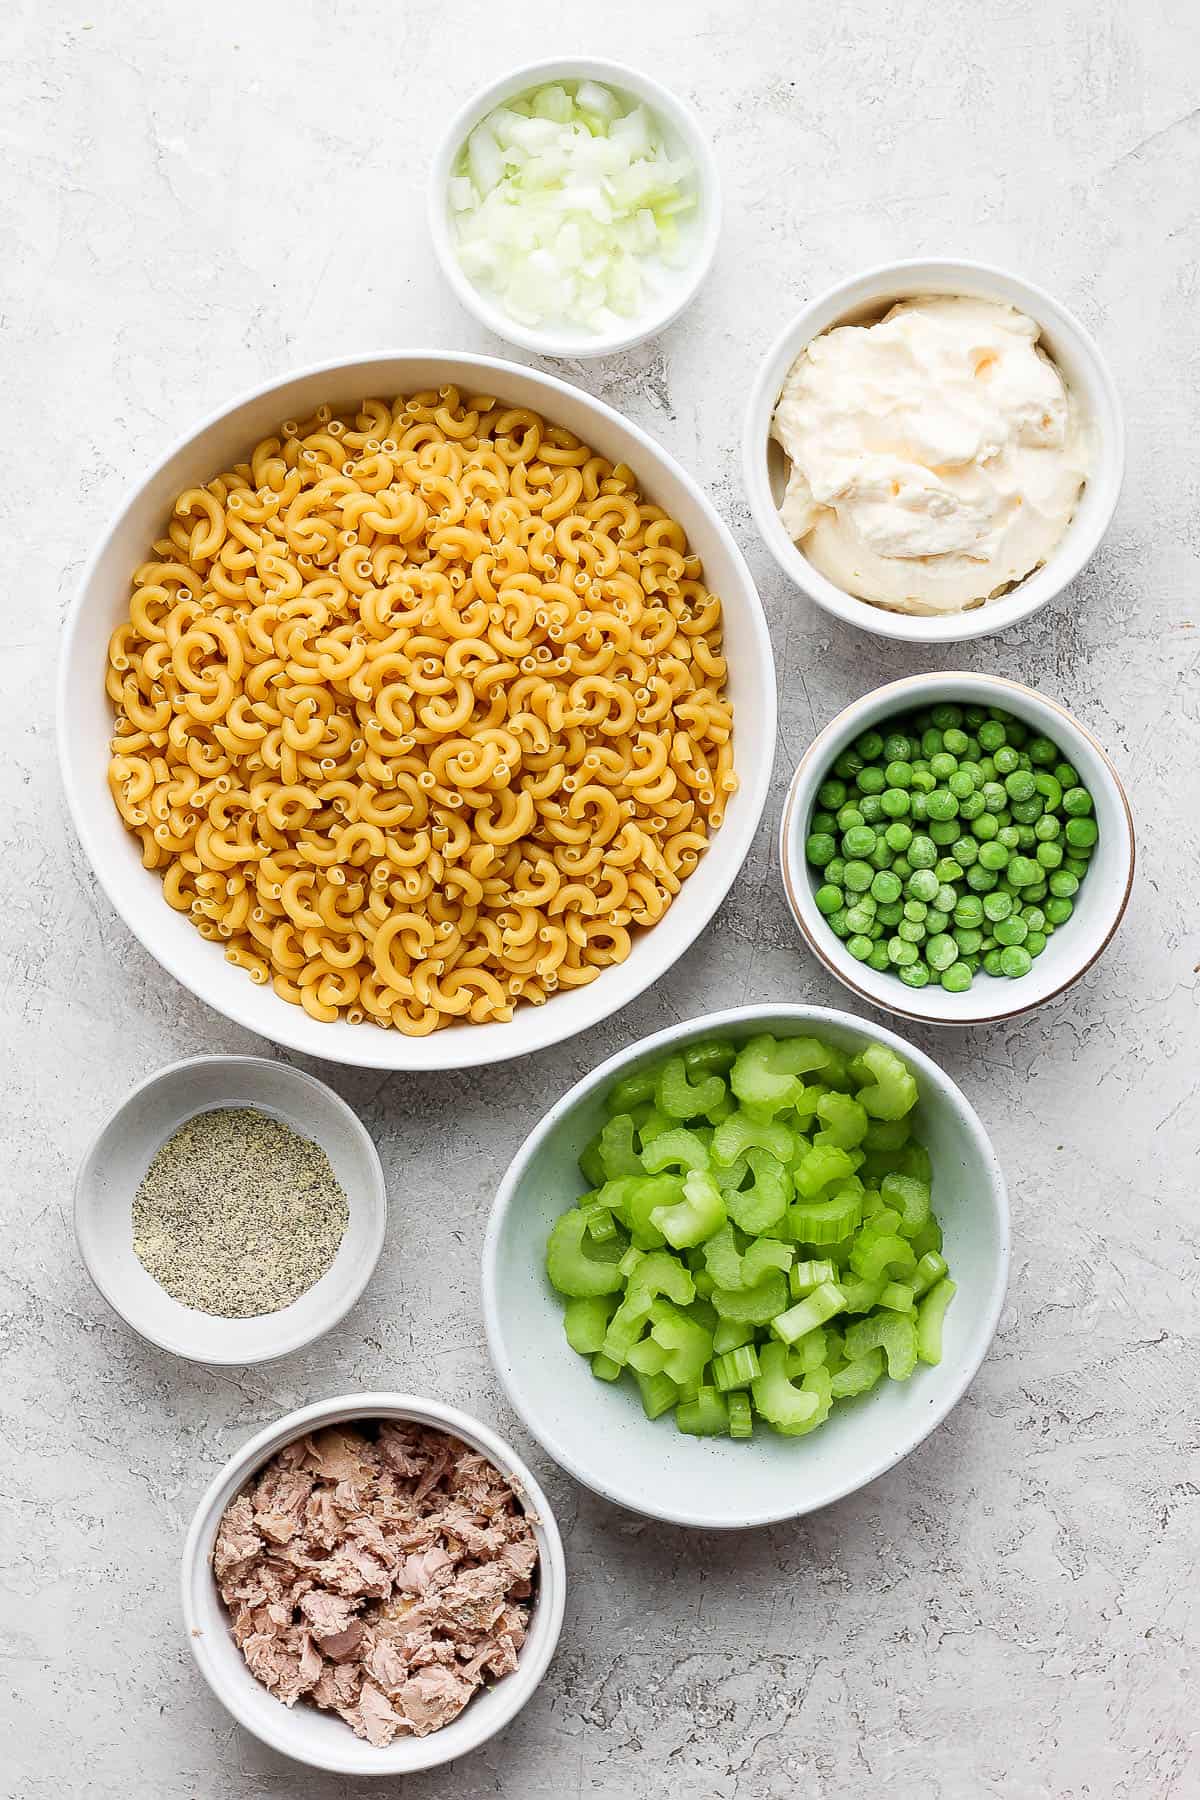 All of the tuna macaroni salad ingredients in separate bowls.